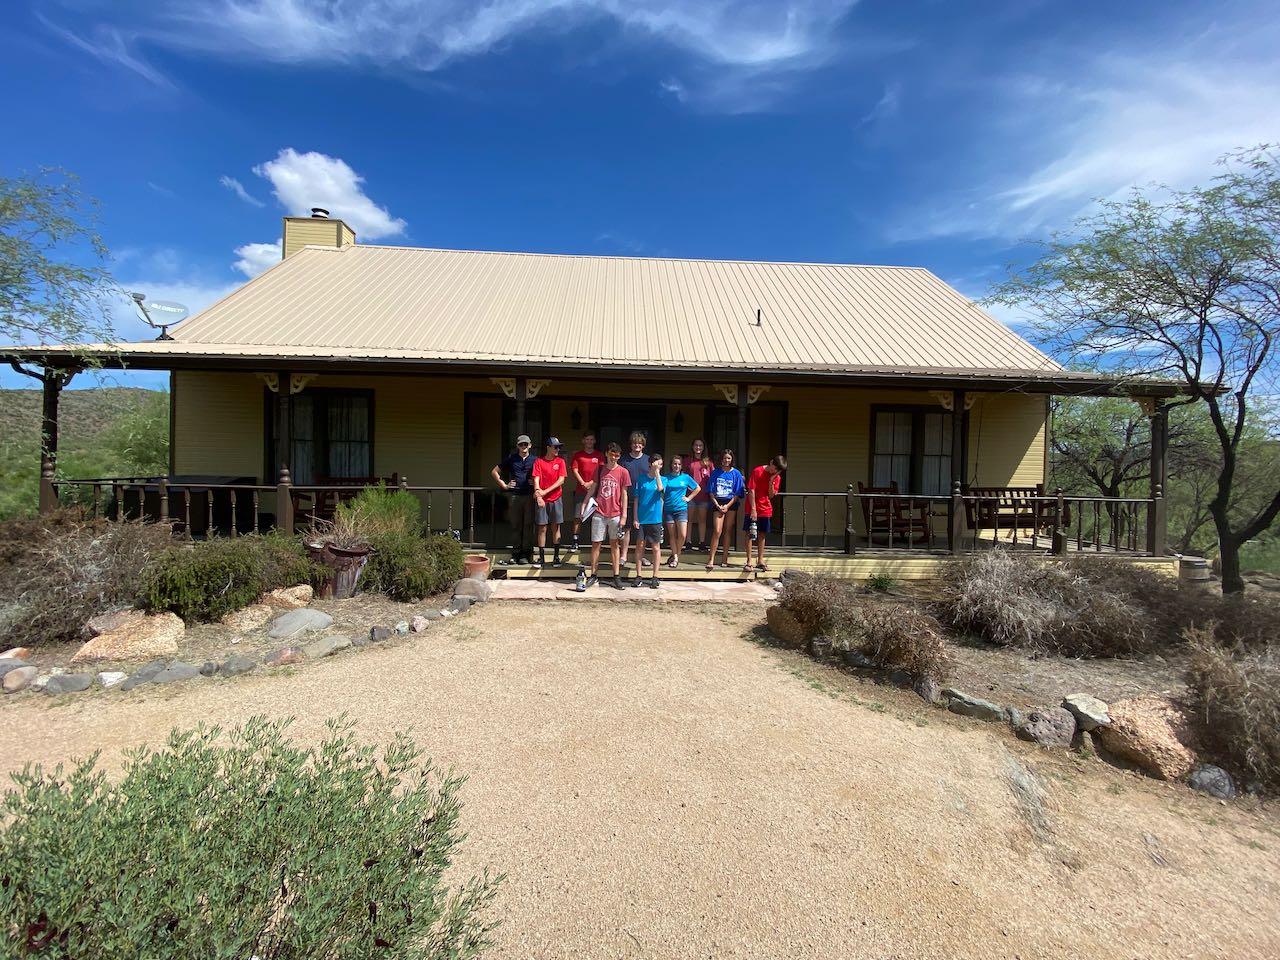 Planning crew in front of ranch house